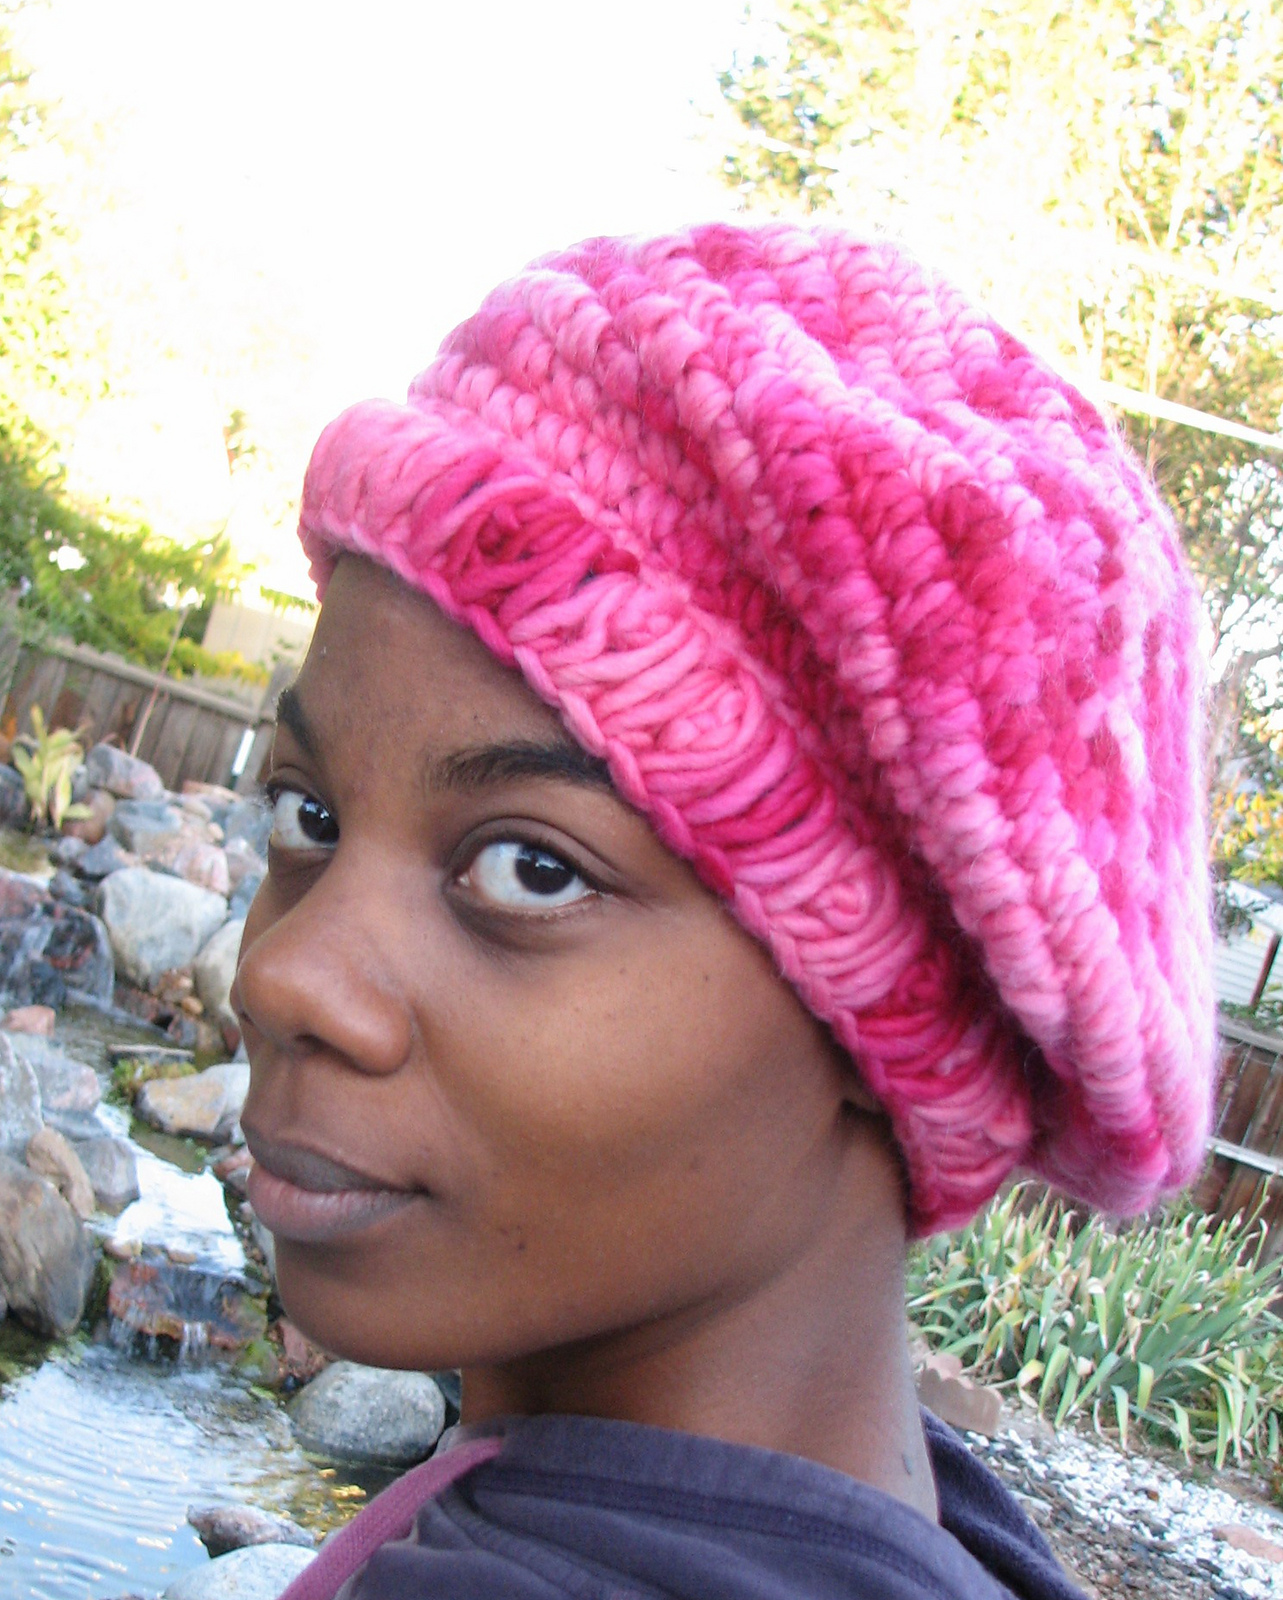 A black woman wears a beret crocheted with bright pink yarn